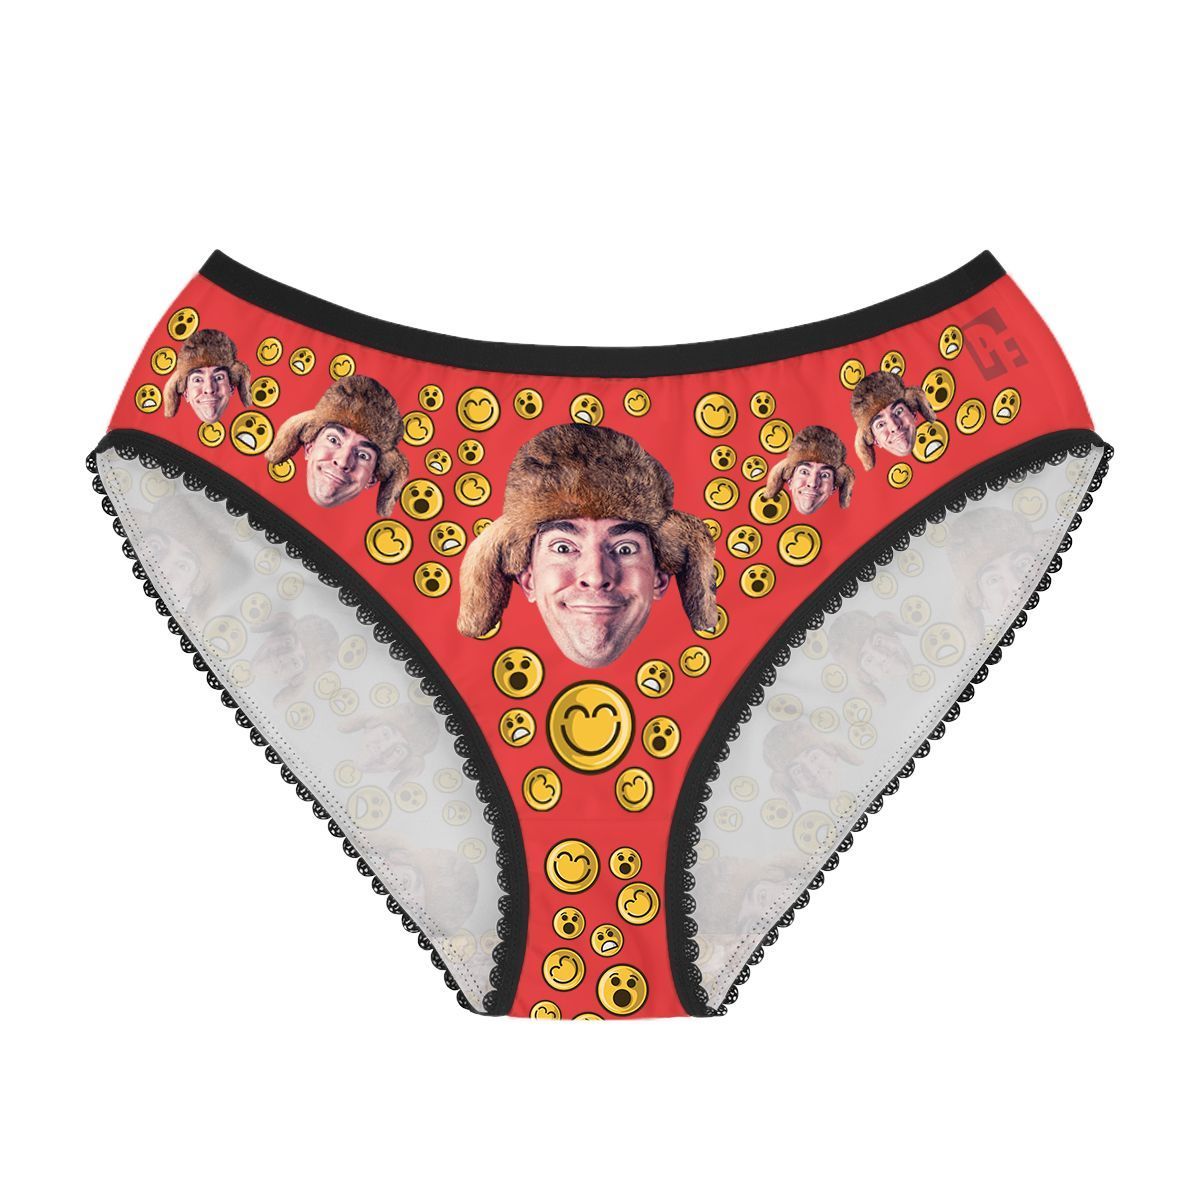 Red Smiles women's underwear briefs personalized with photo printed on them